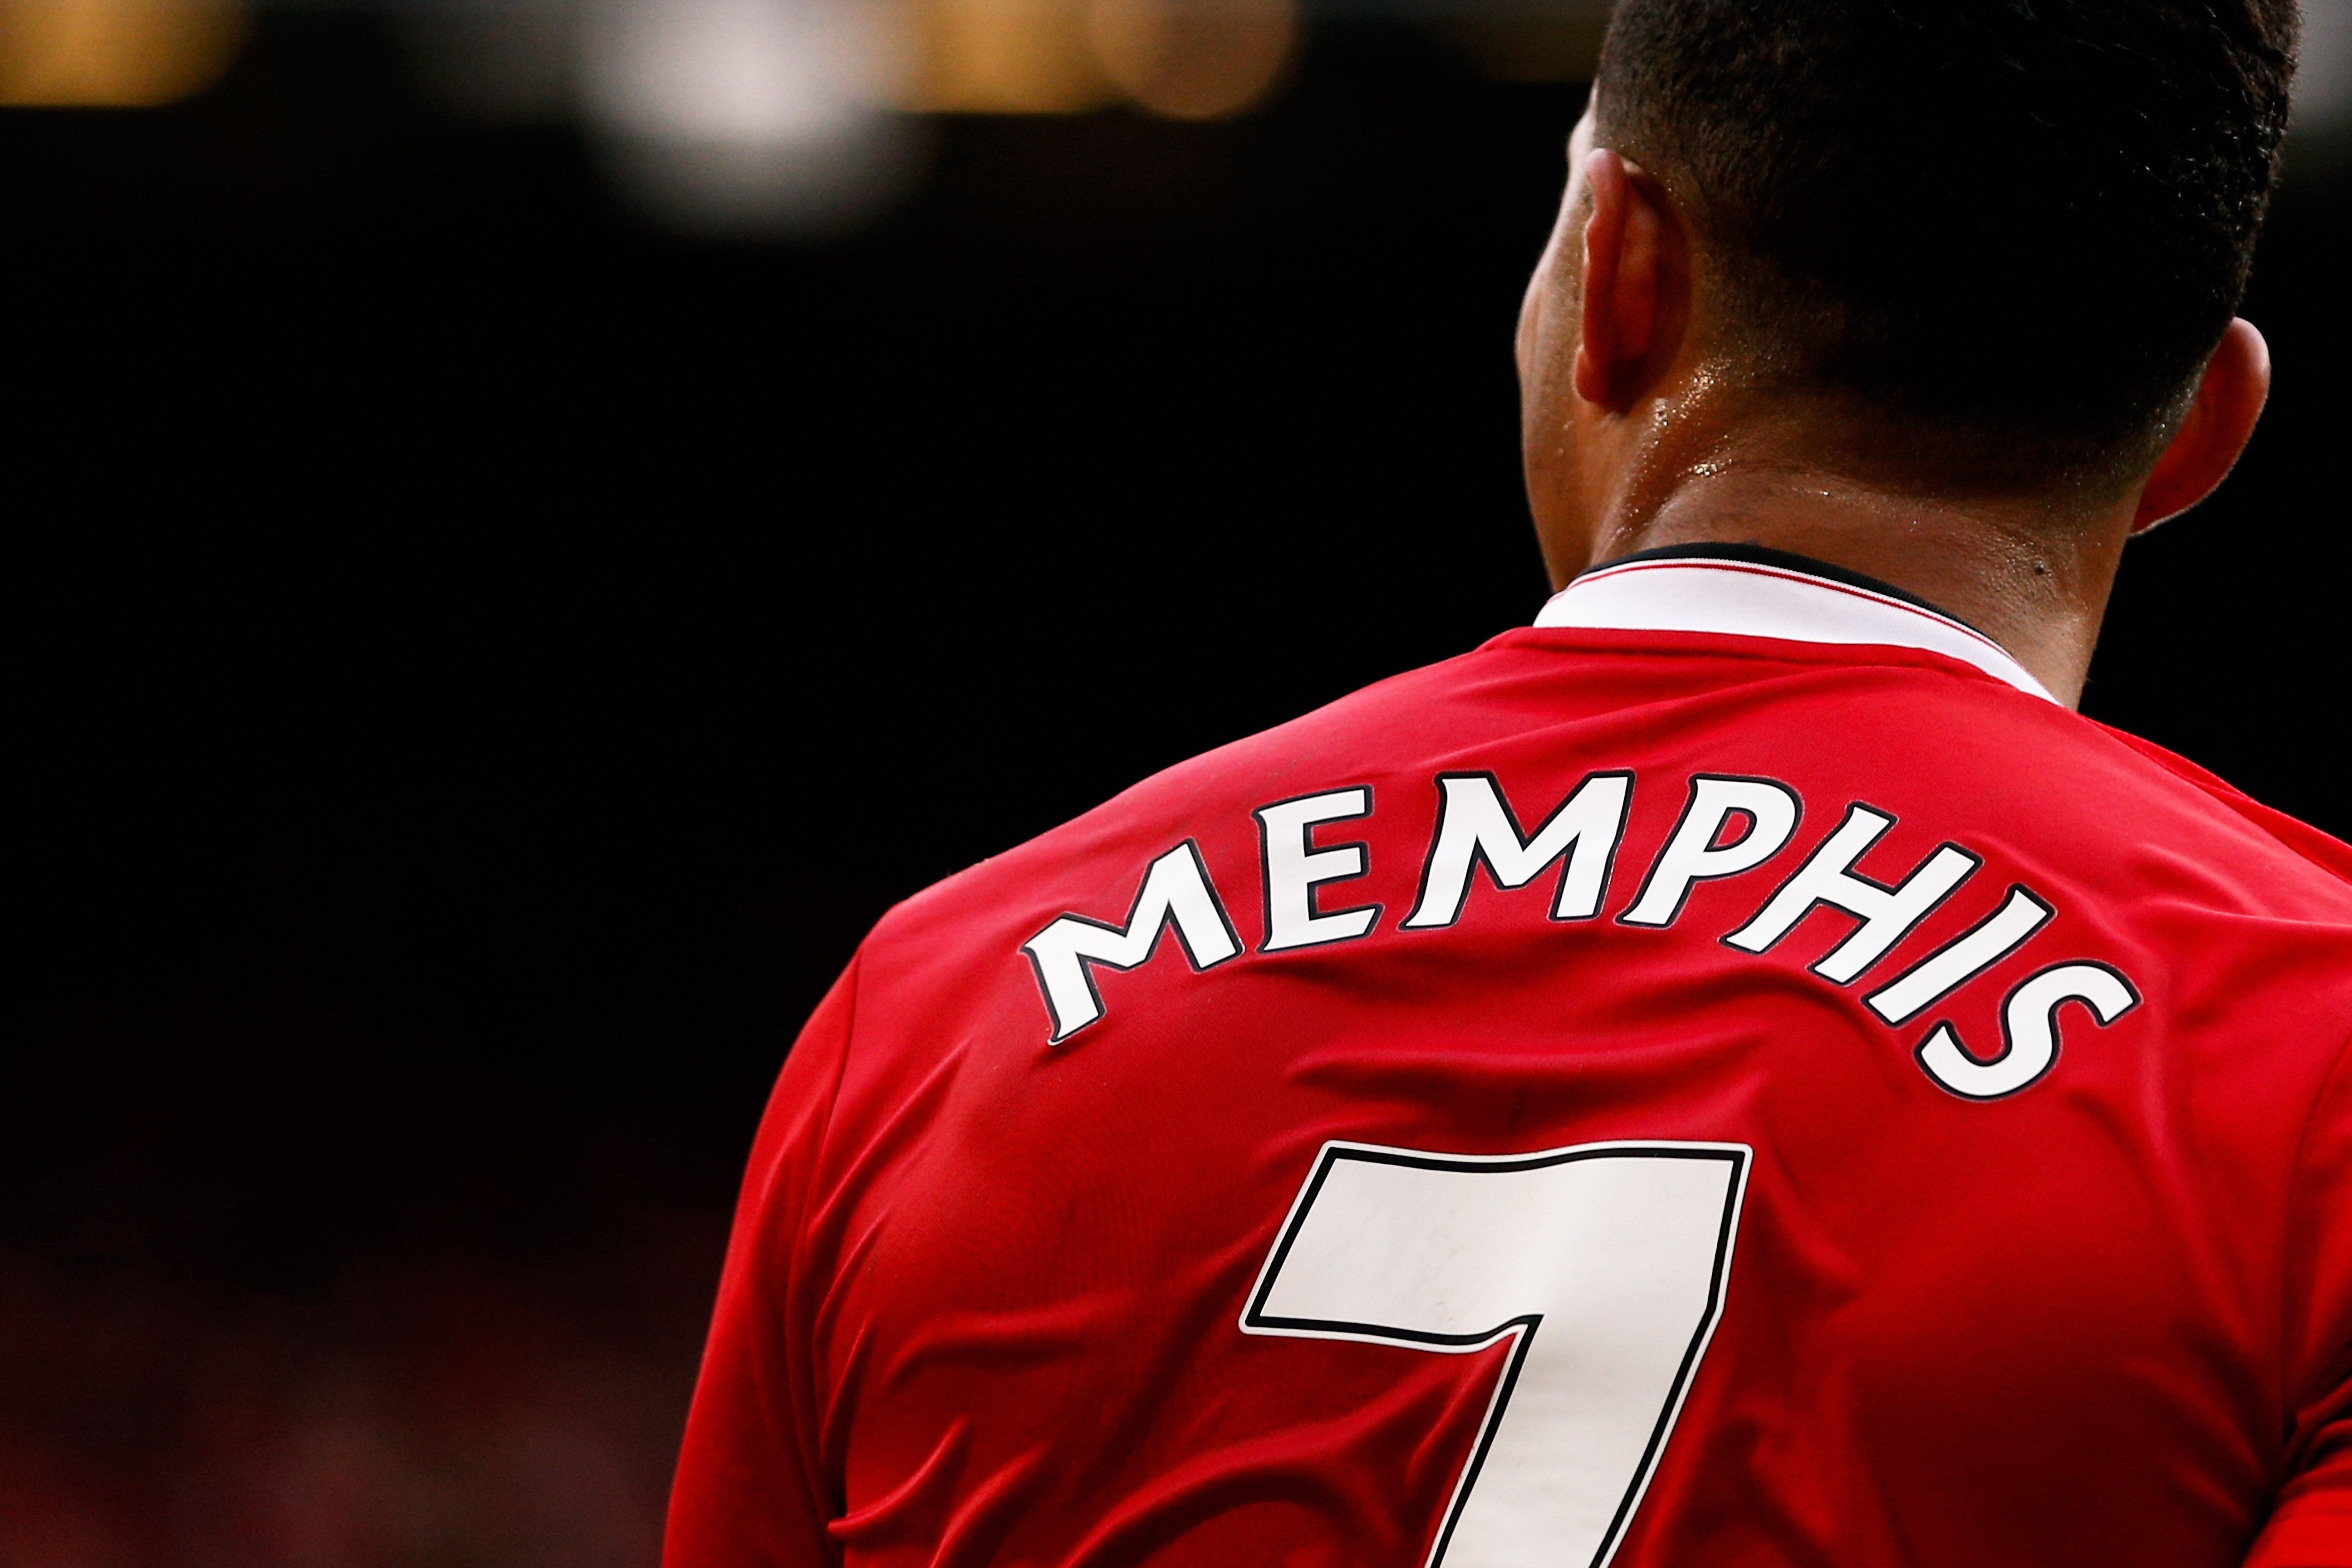 Memphis Depay speaks about why it went wrong at Manchester United